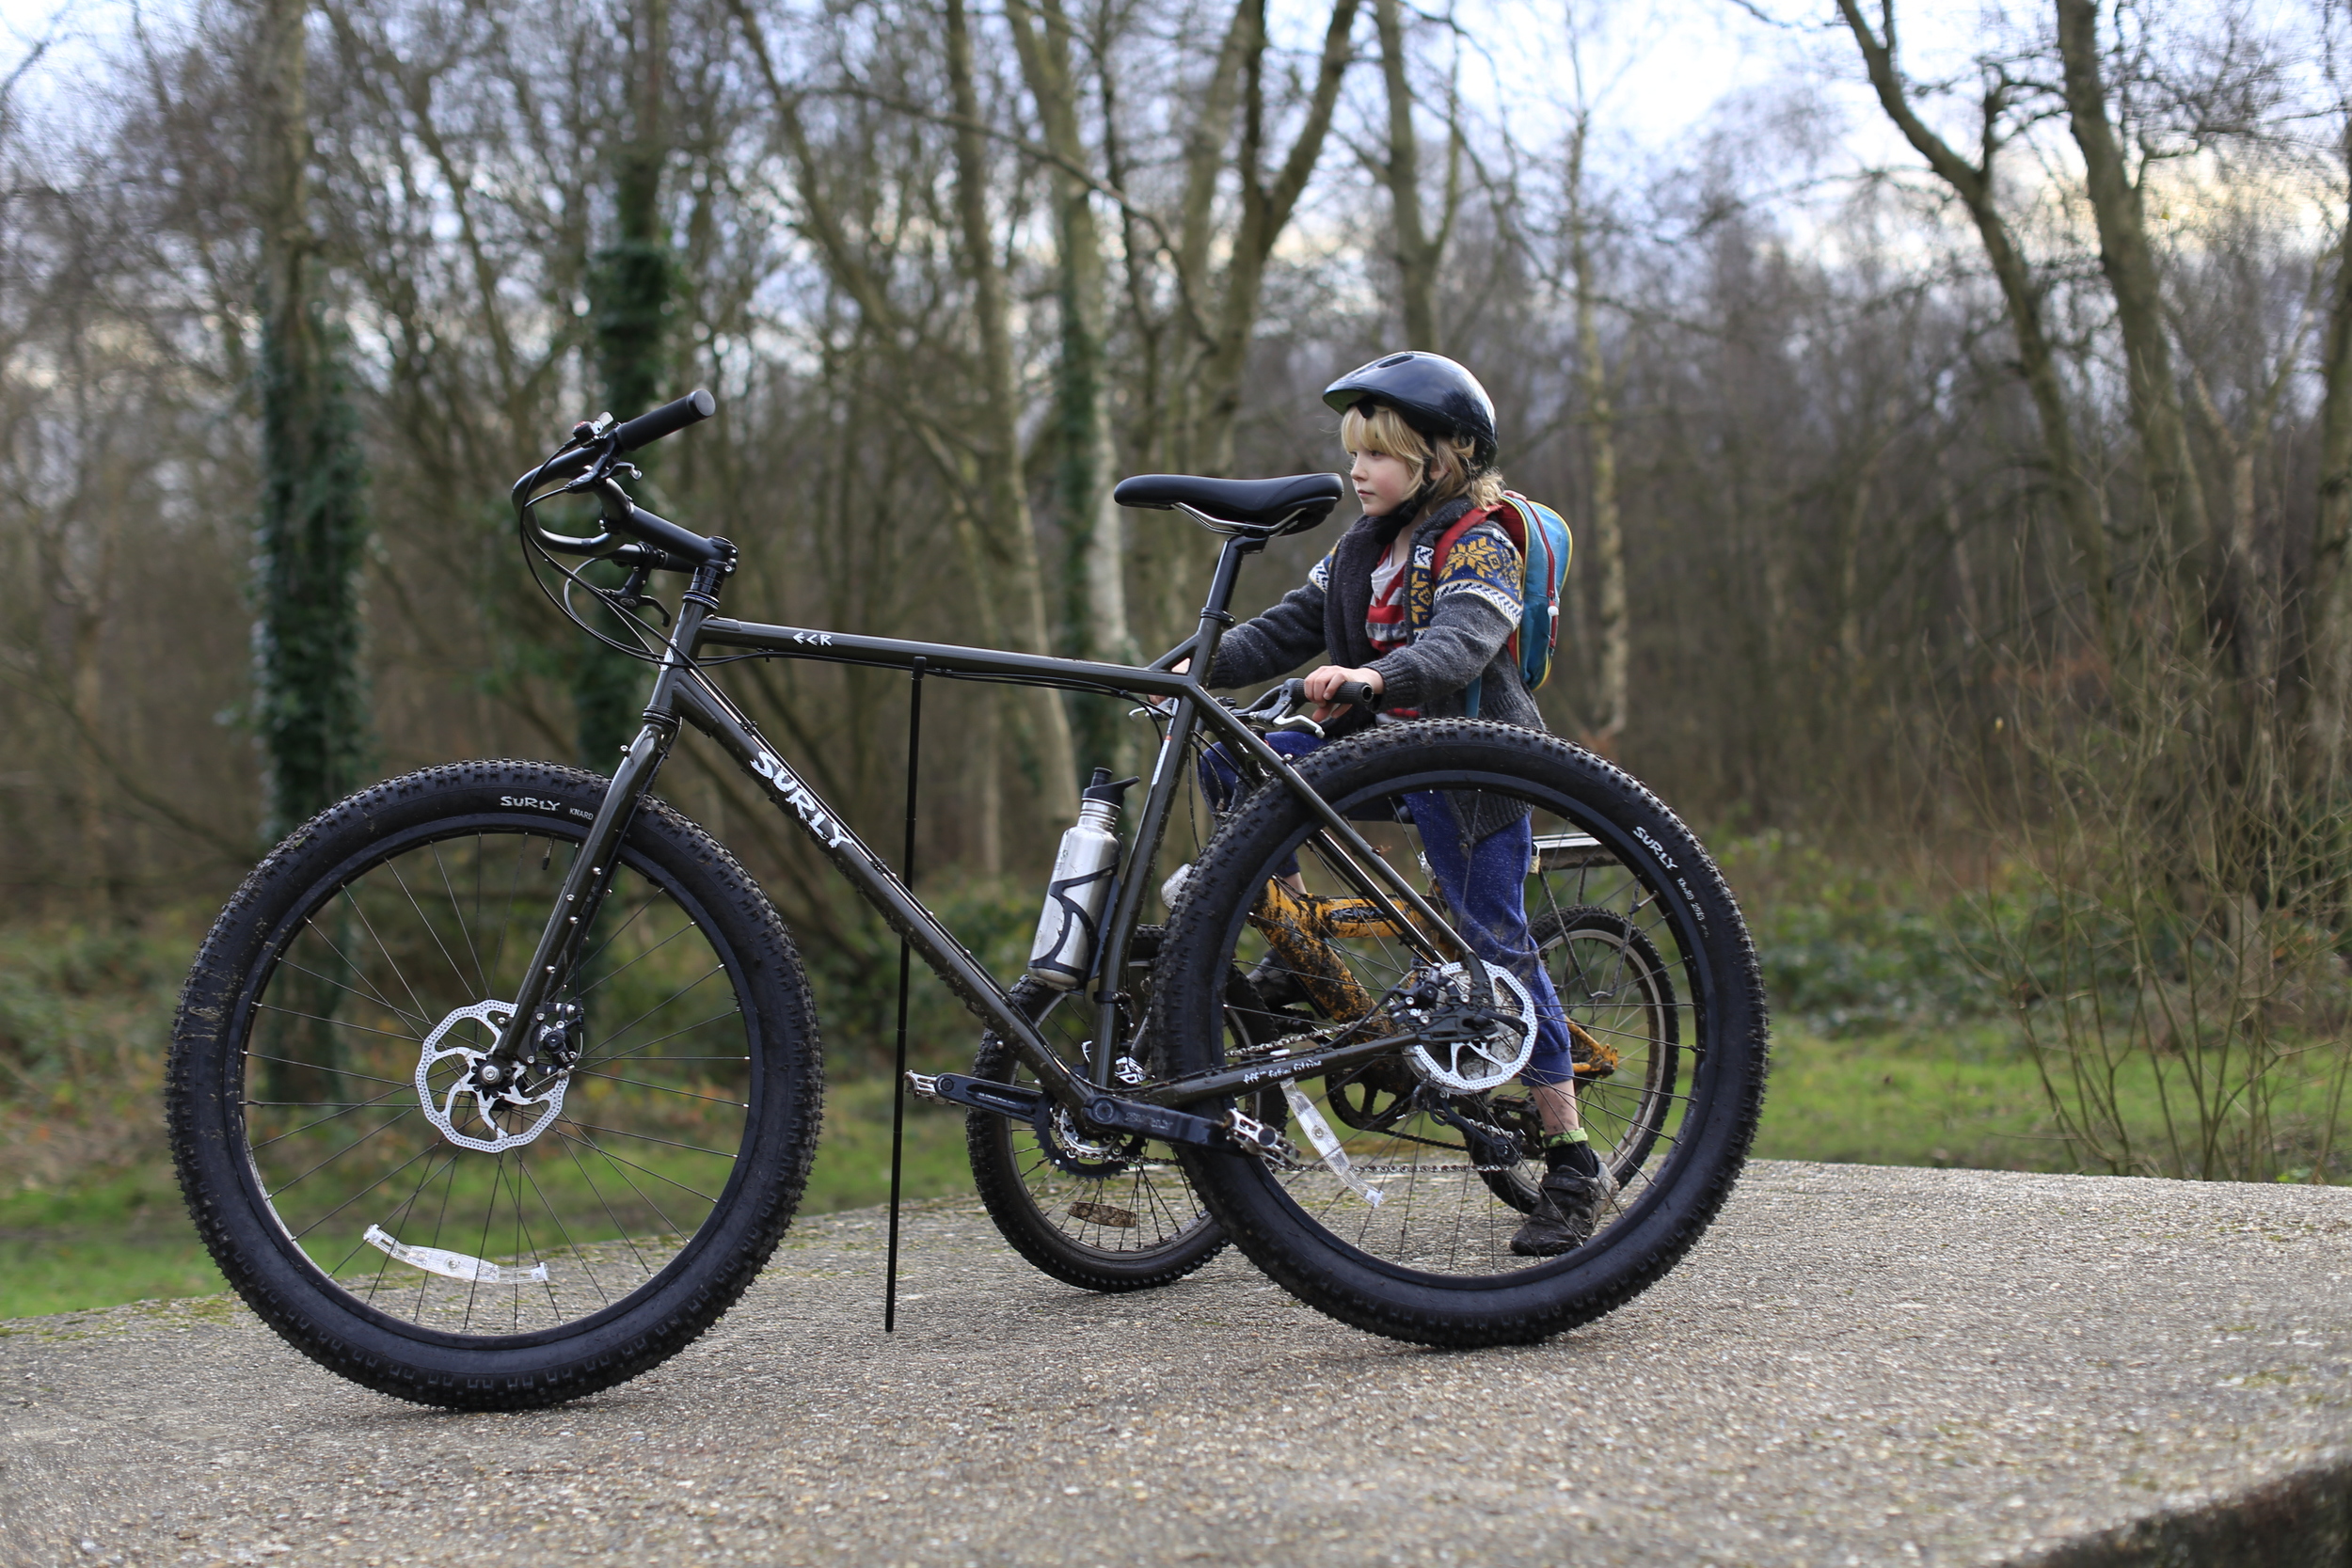 woods, singletrack, surly, surly ecr, mtb, canon, canon 6d, review